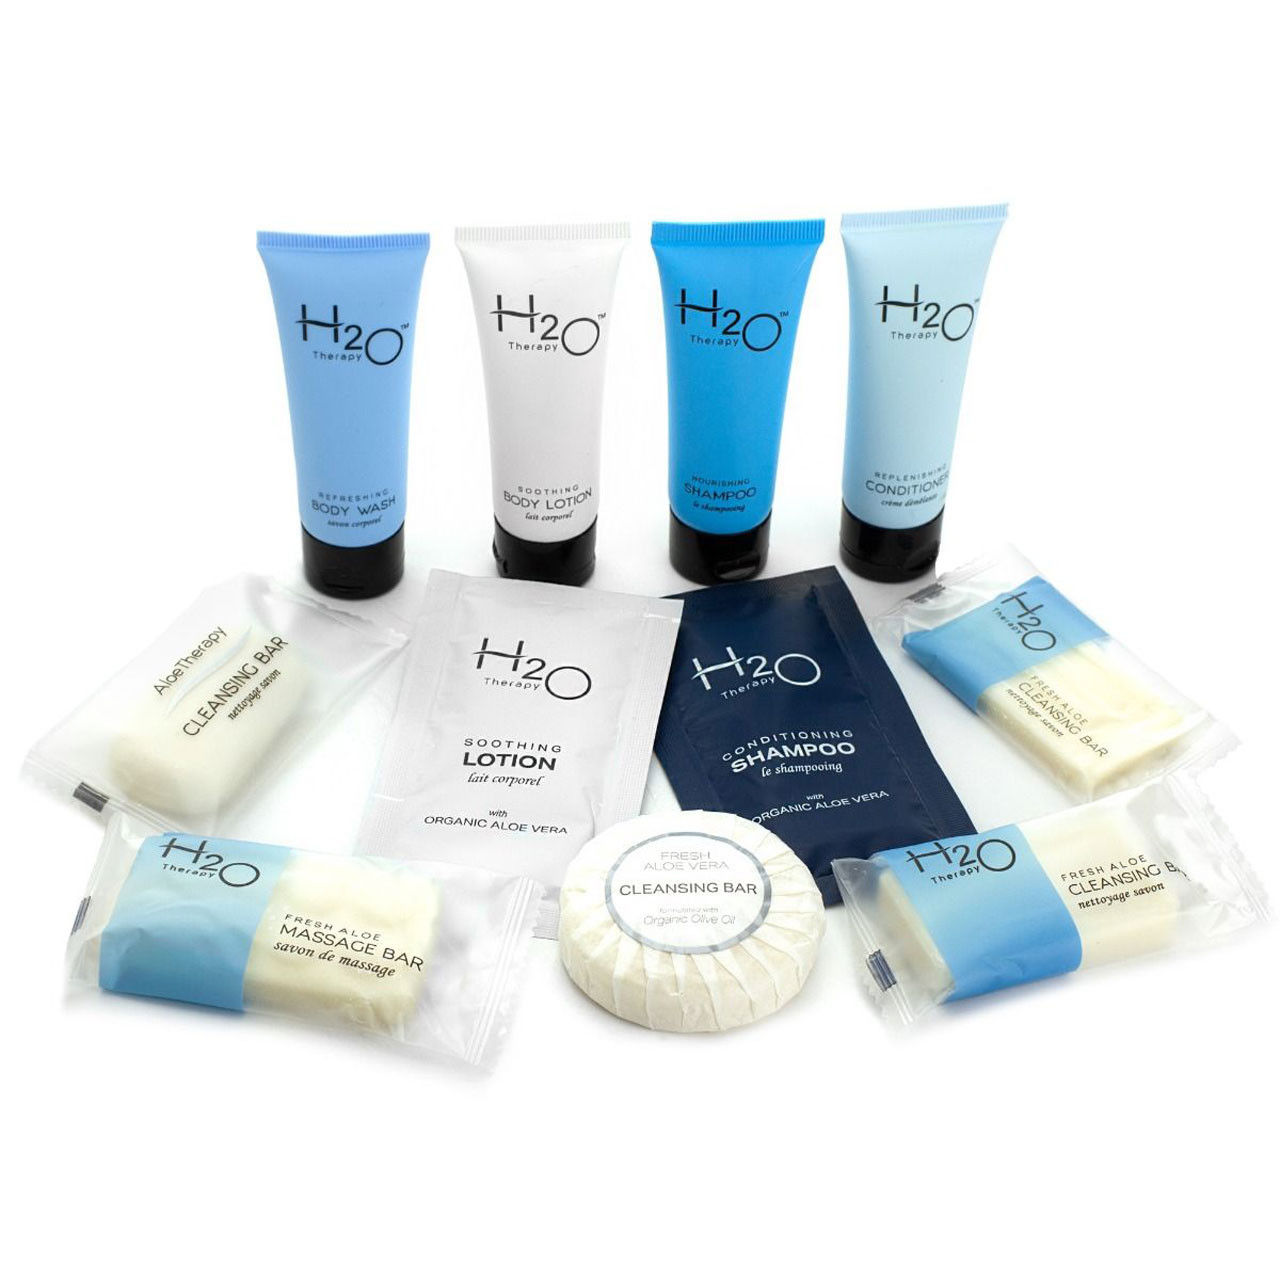 Where can one locate the H2O Therapy Collection, including the H2O Therapy shampoo?